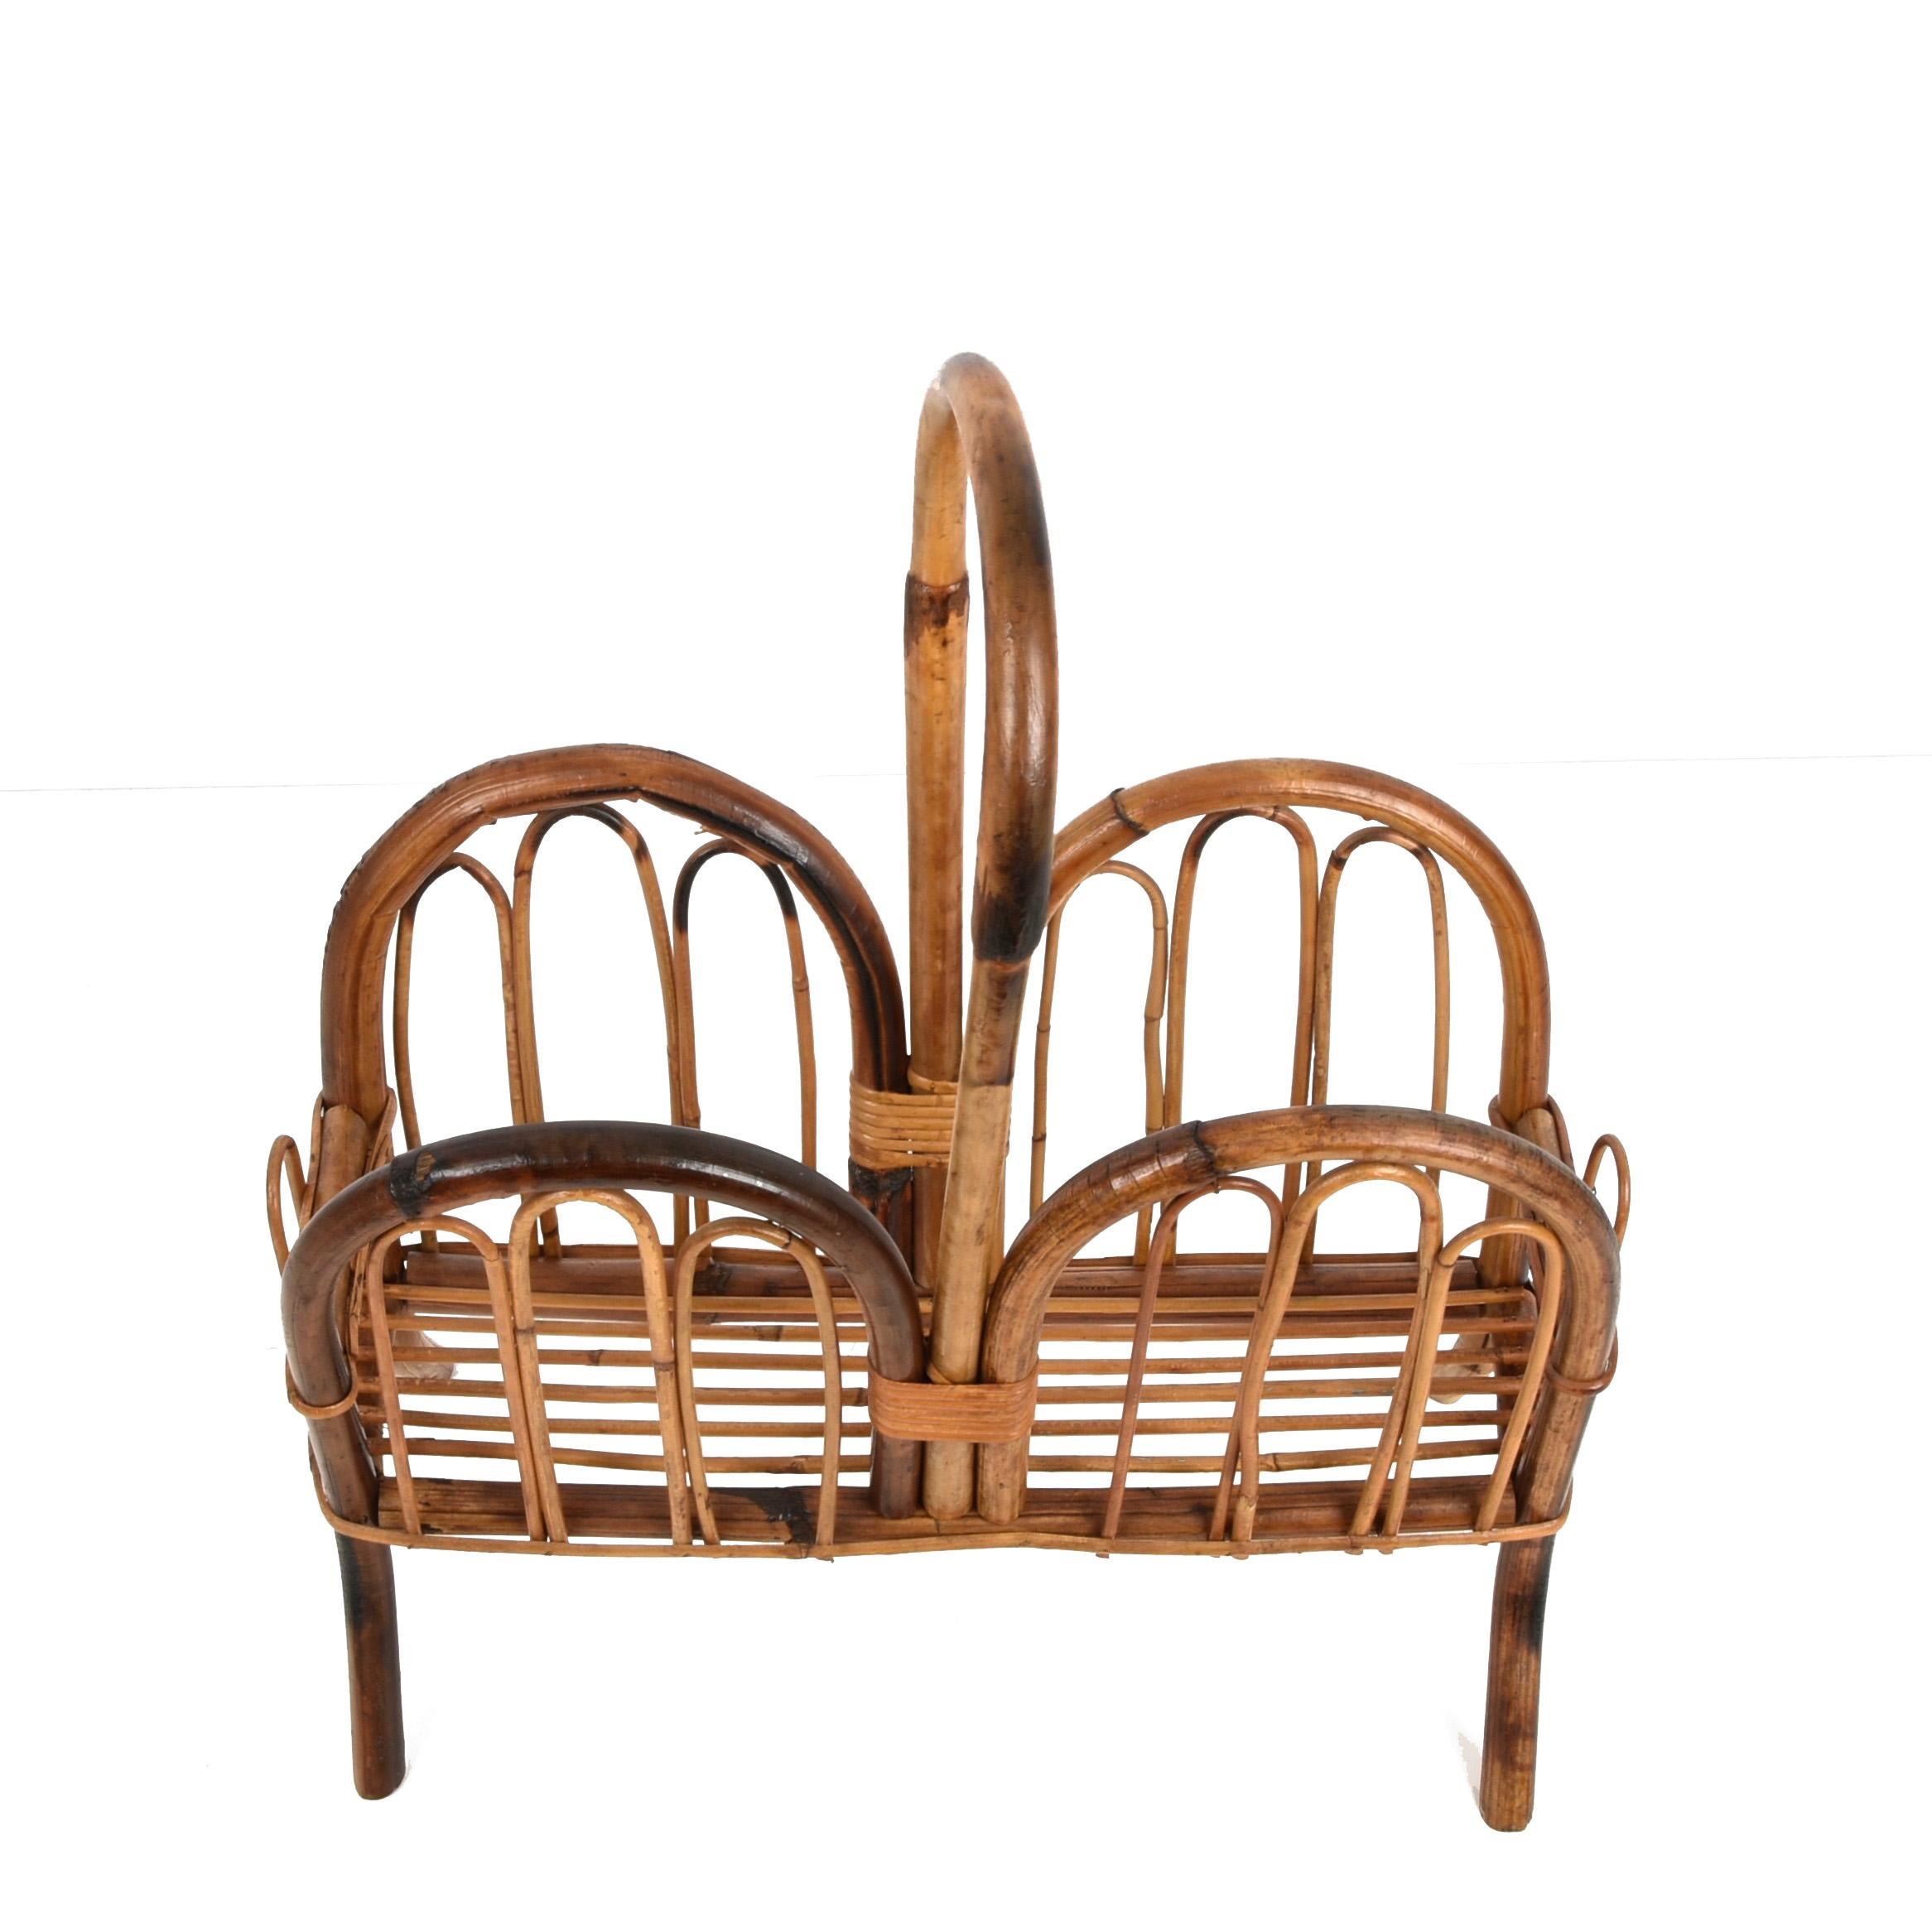 Midcentury French Riviera Bamboo and Rattan Italian Magazine Rack, 1960s For Sale 1